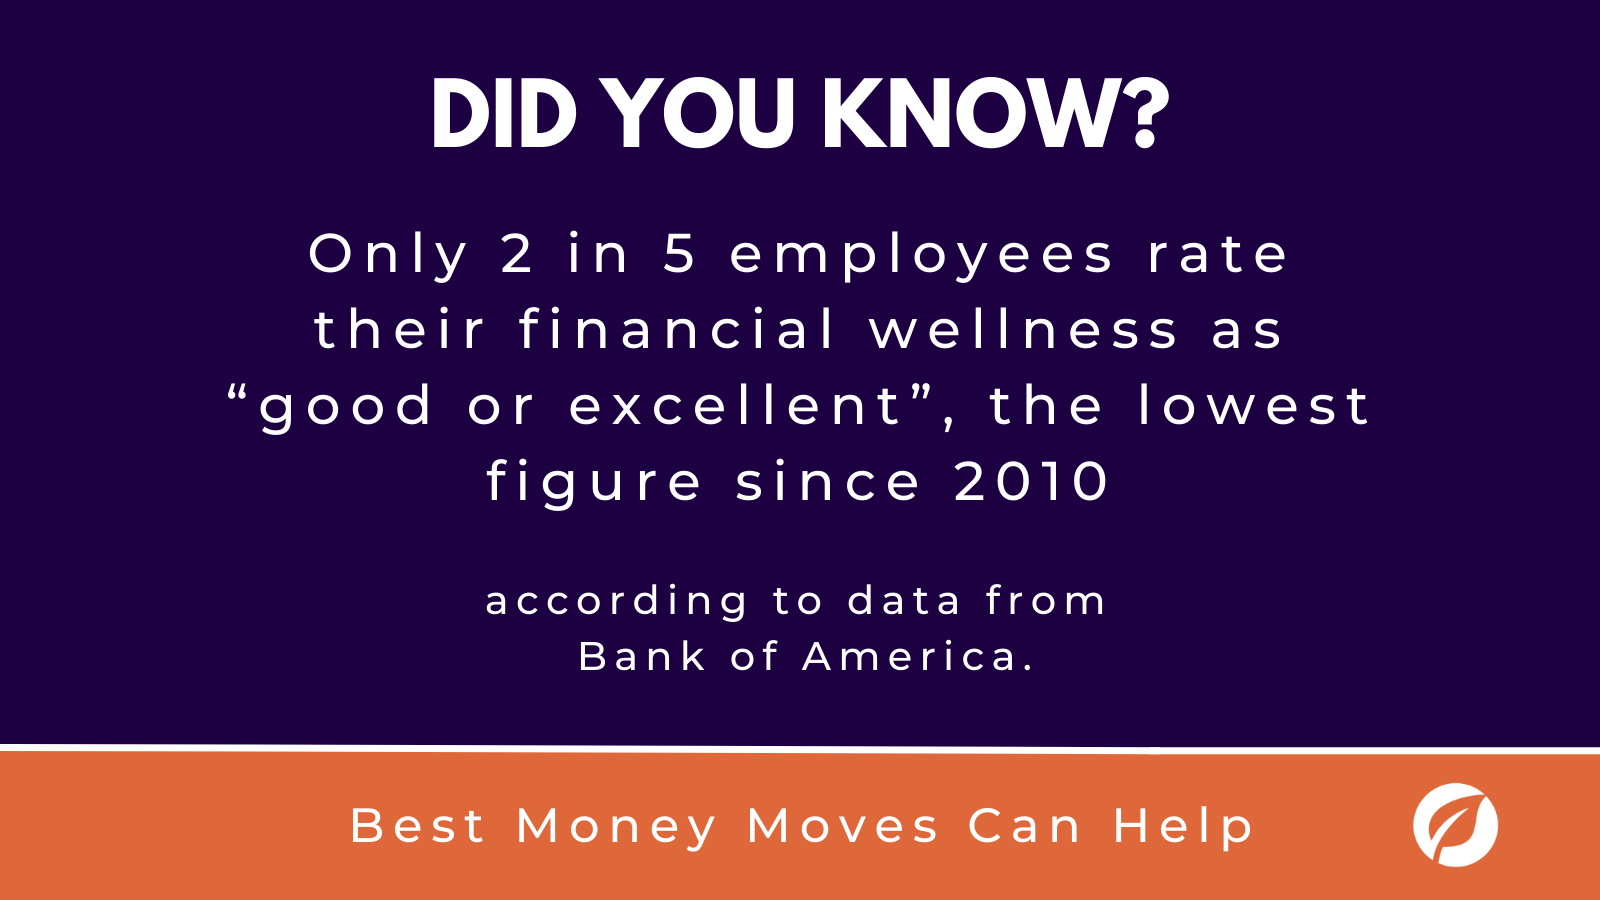 A surprising statistic about the state of employee financial wellness